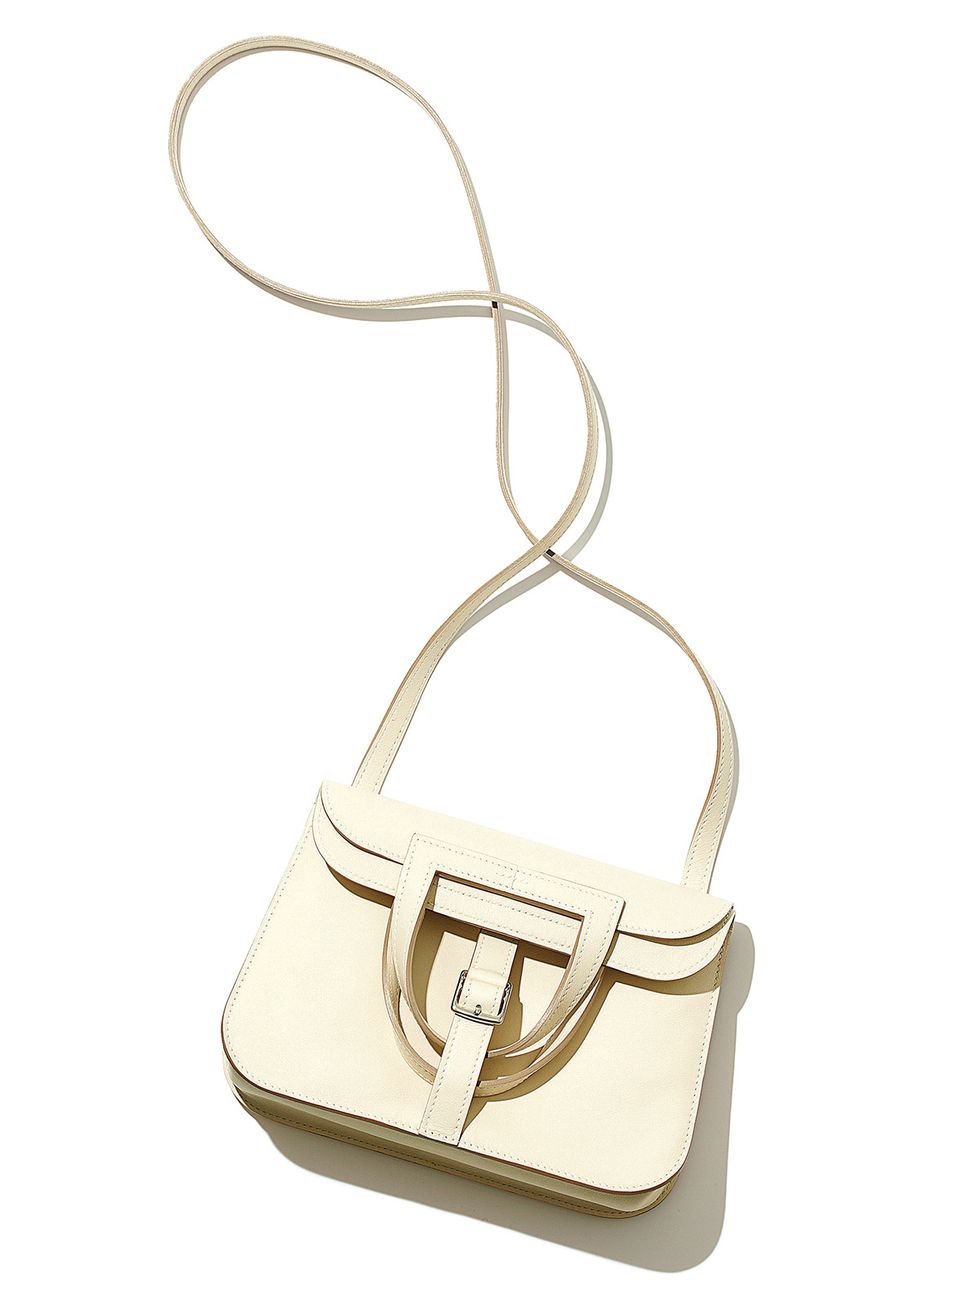 Product, Metal, Shoulder bag, Pattern, Beige, Material property, Silver, Fashion design, Chain, Natural material, 